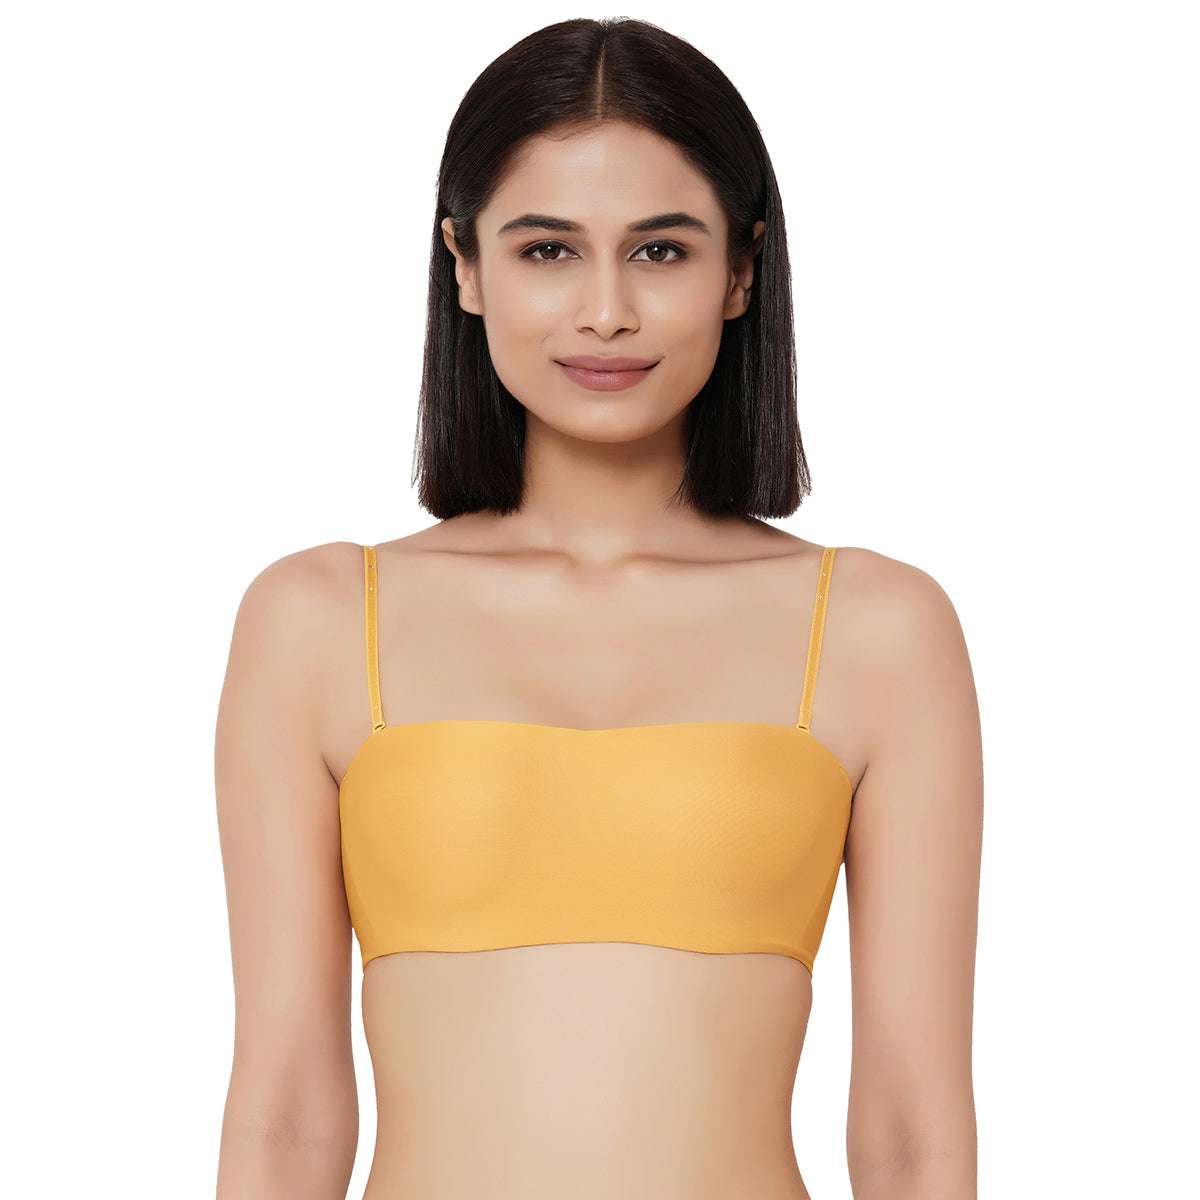 Basic Mold Padded Wired Half Cup Strapless Bandeau T Shirt Bra Yellow